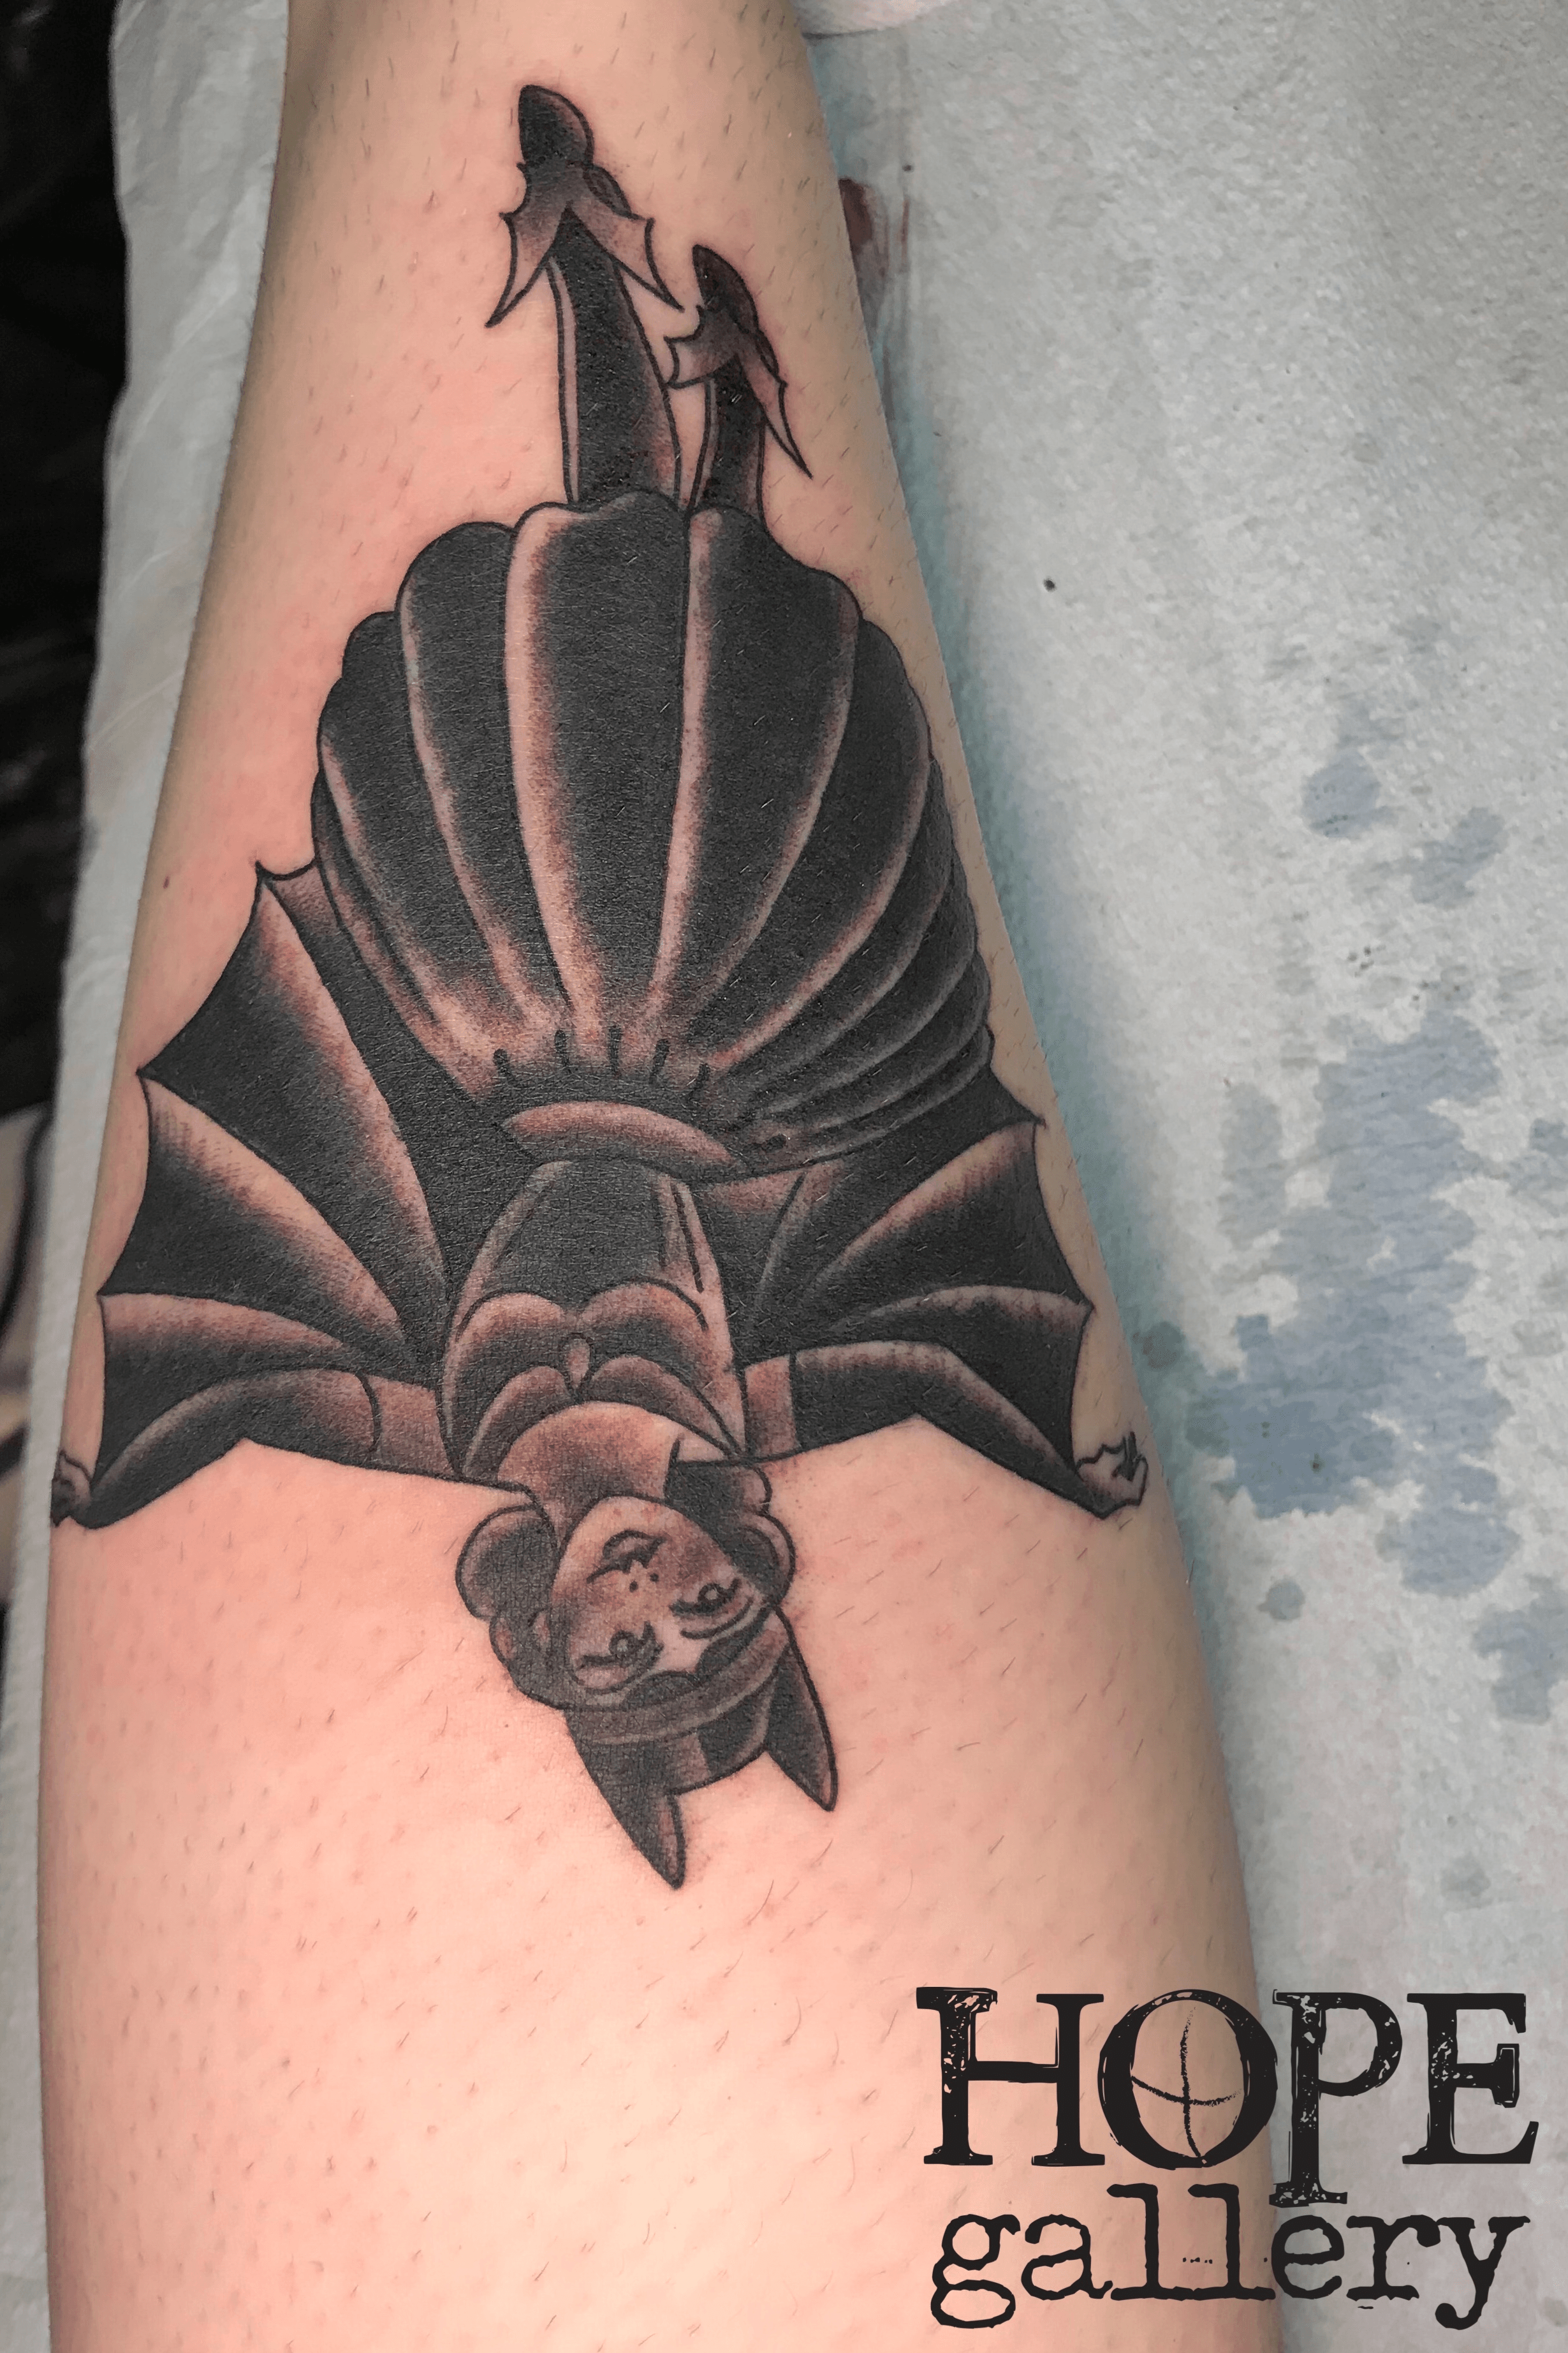 fresh ink  tattoo done by phil young  hope gallery tattoo   Flickr